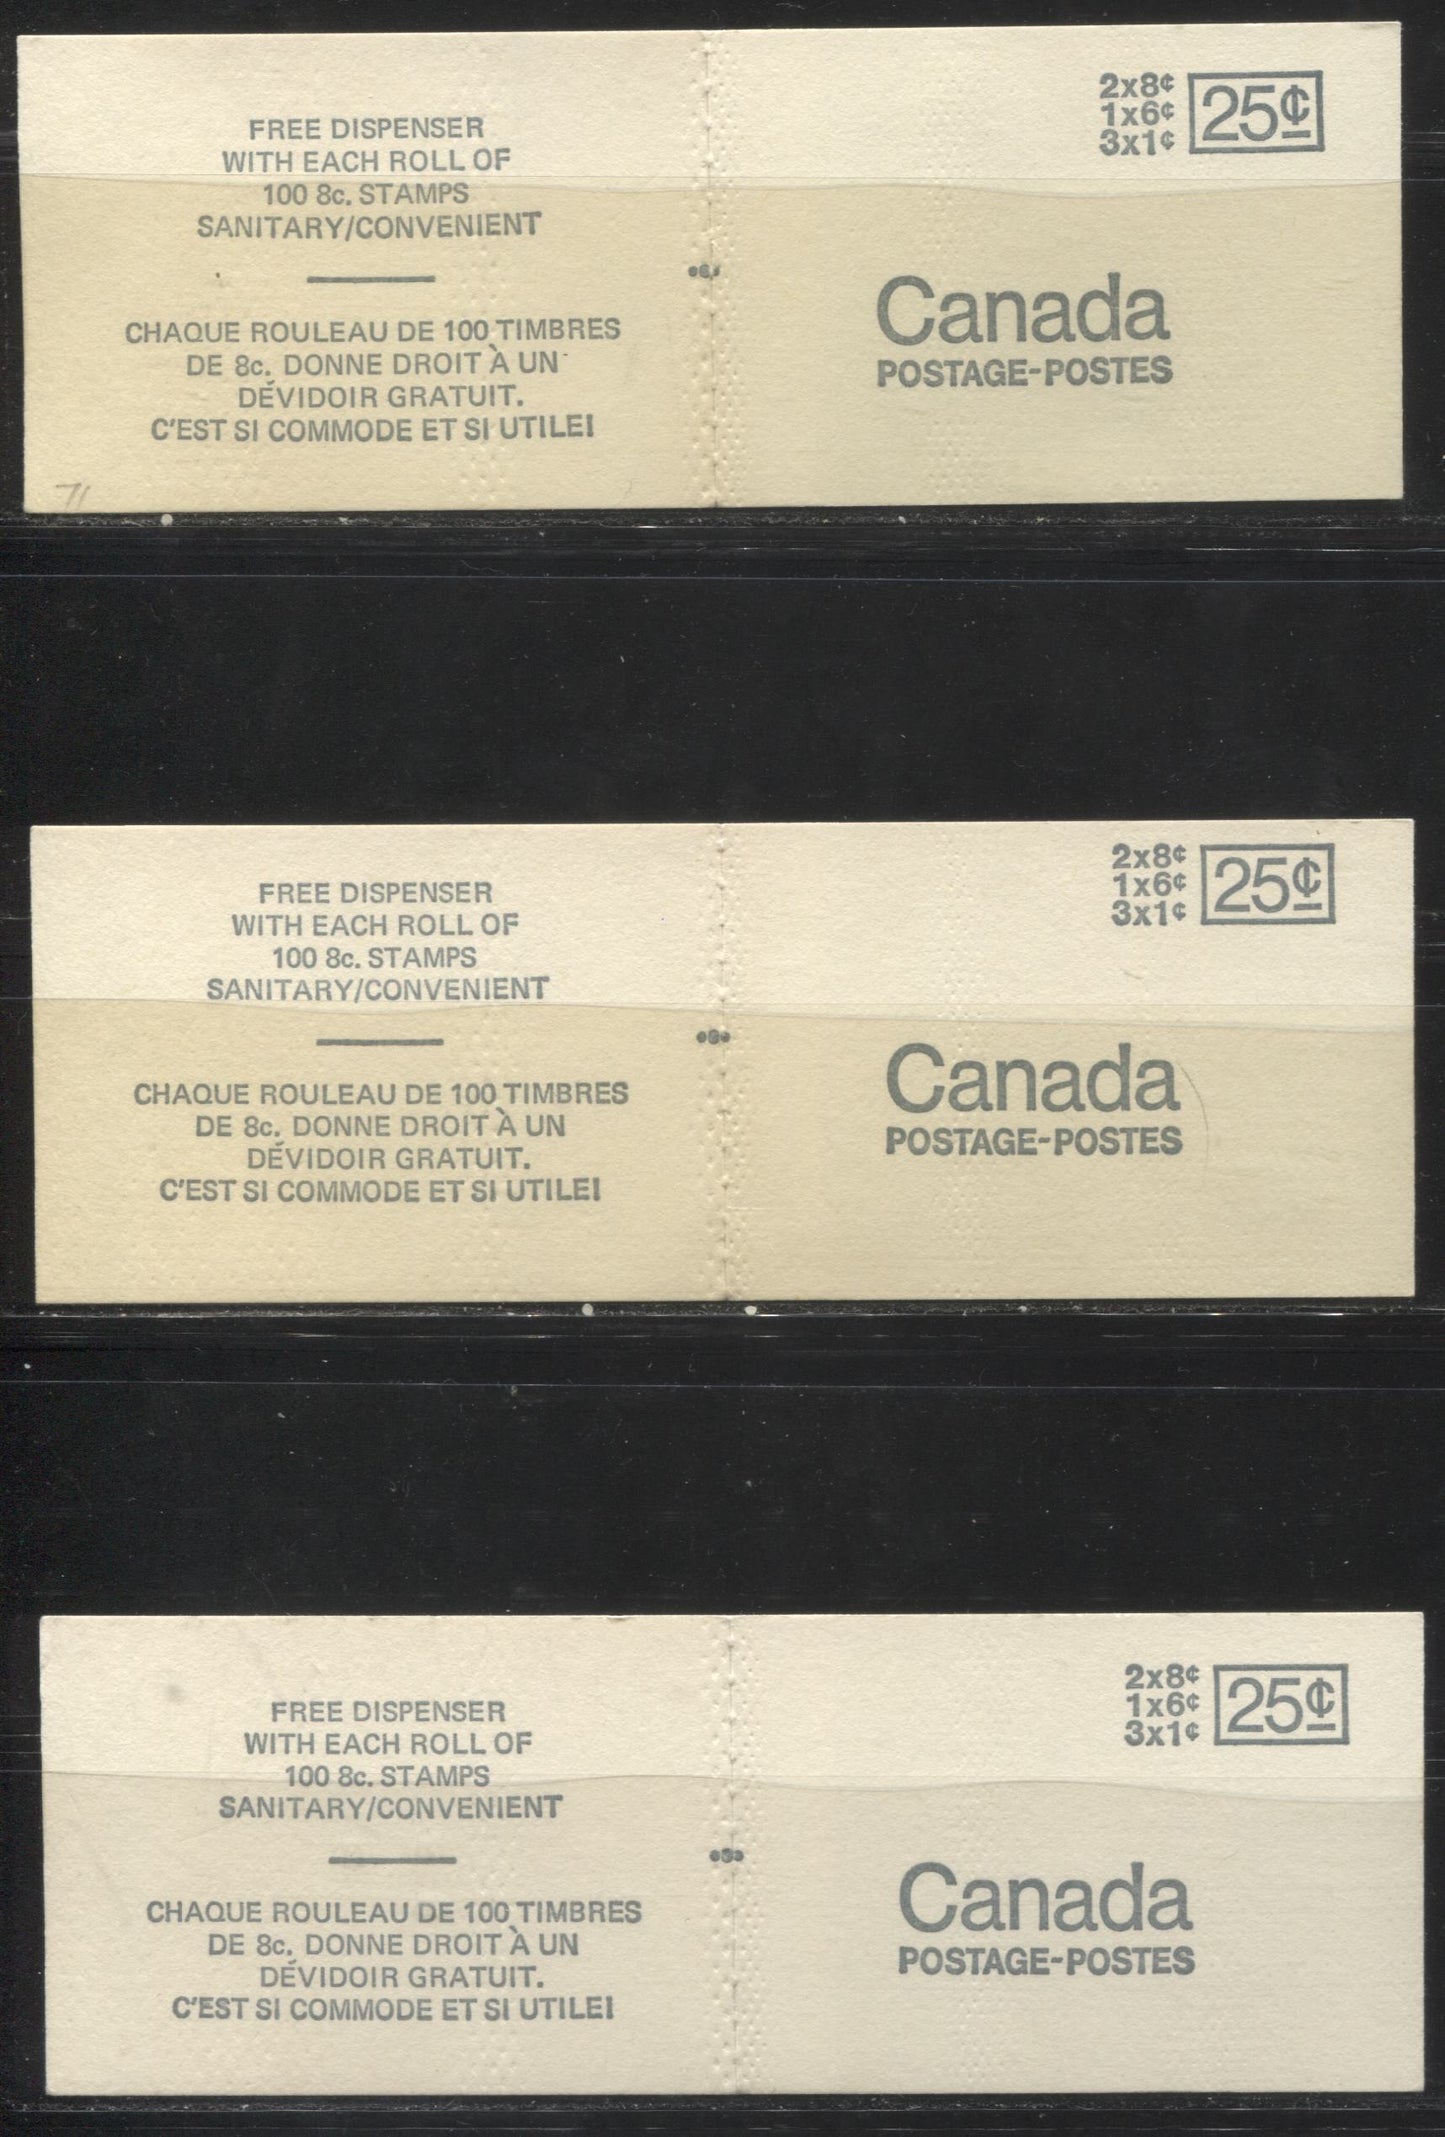 Lot #59 Canada McCann #BK69f,j 1c Purple Brown, 6c Black, And 8c Slate, 1967-1973 Centennial Issue, A Specialized Lot of Three 25c Booklets, Type 1 Free Dispenser Cover, Different MF-fl and HF-fl Papers, Settings A, B & C As Described in Harris